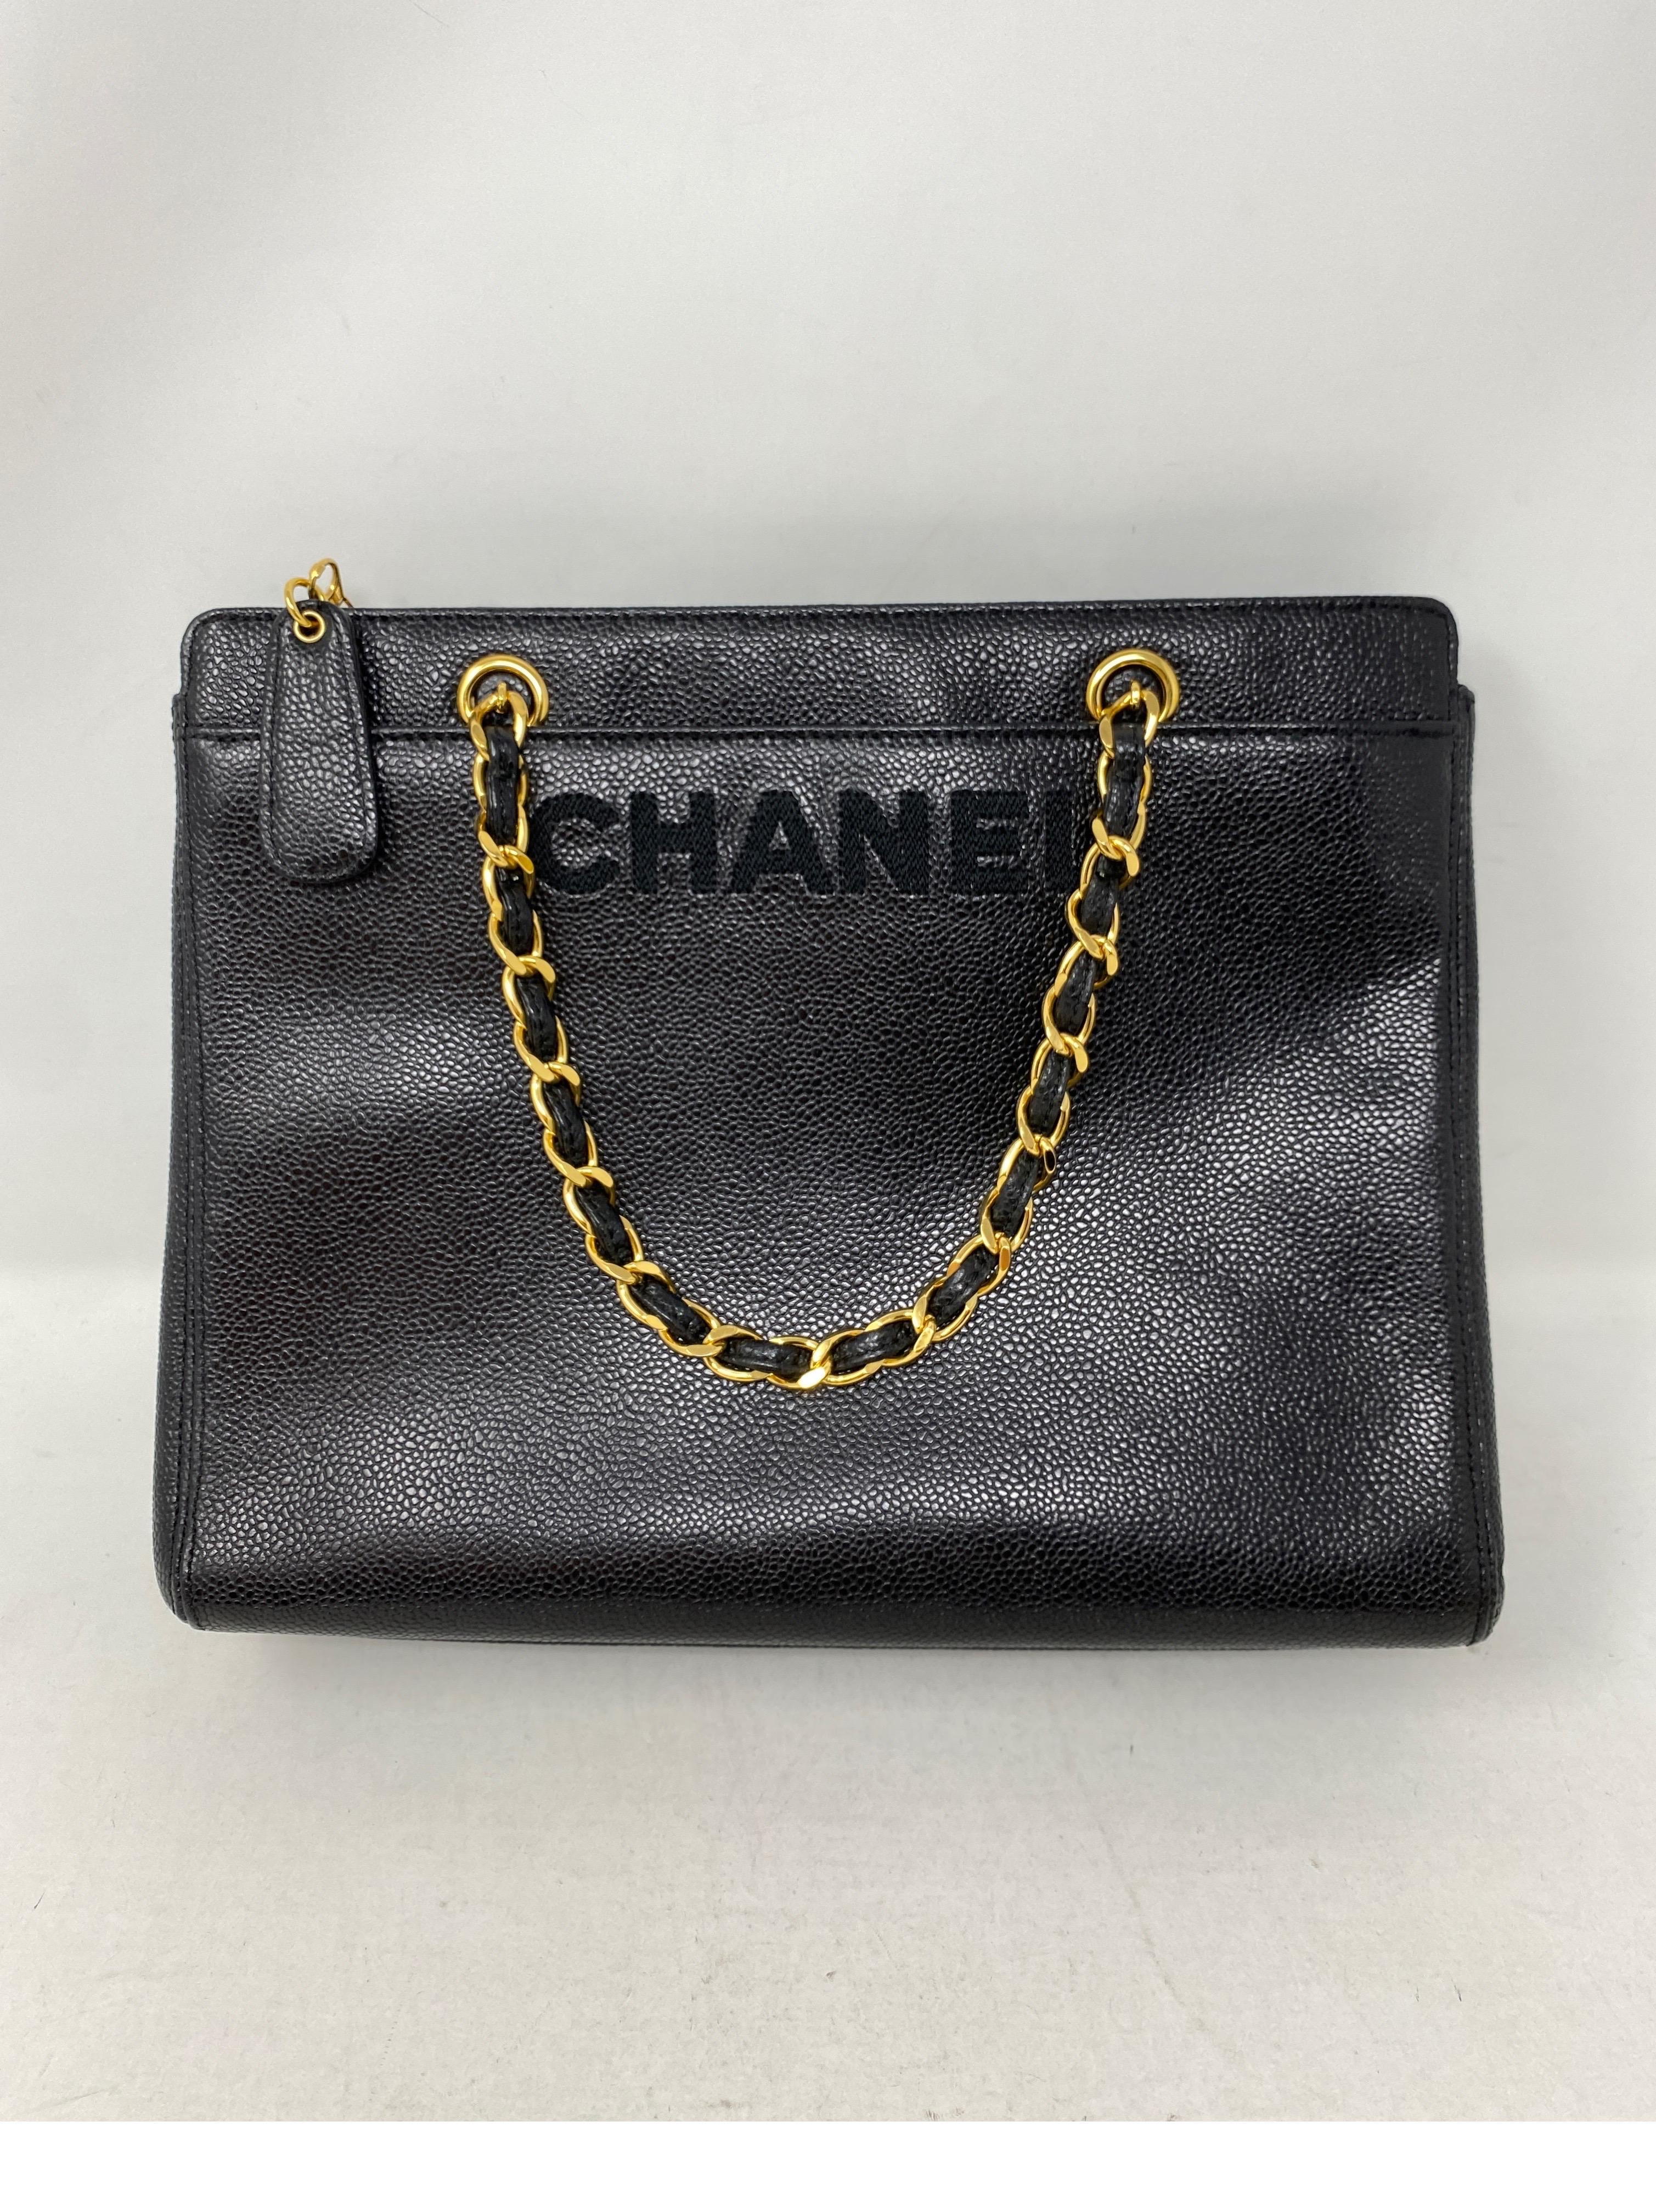 Chanel Vintage Black Tote Bag. Caviar leather. Gold hardware. Excellent condition. Unique style bag. 24 kt gold plating on hardware. Vintage pieces are highly collectible. Rare one. Includes authenticity card. Guaranteed authentic. 